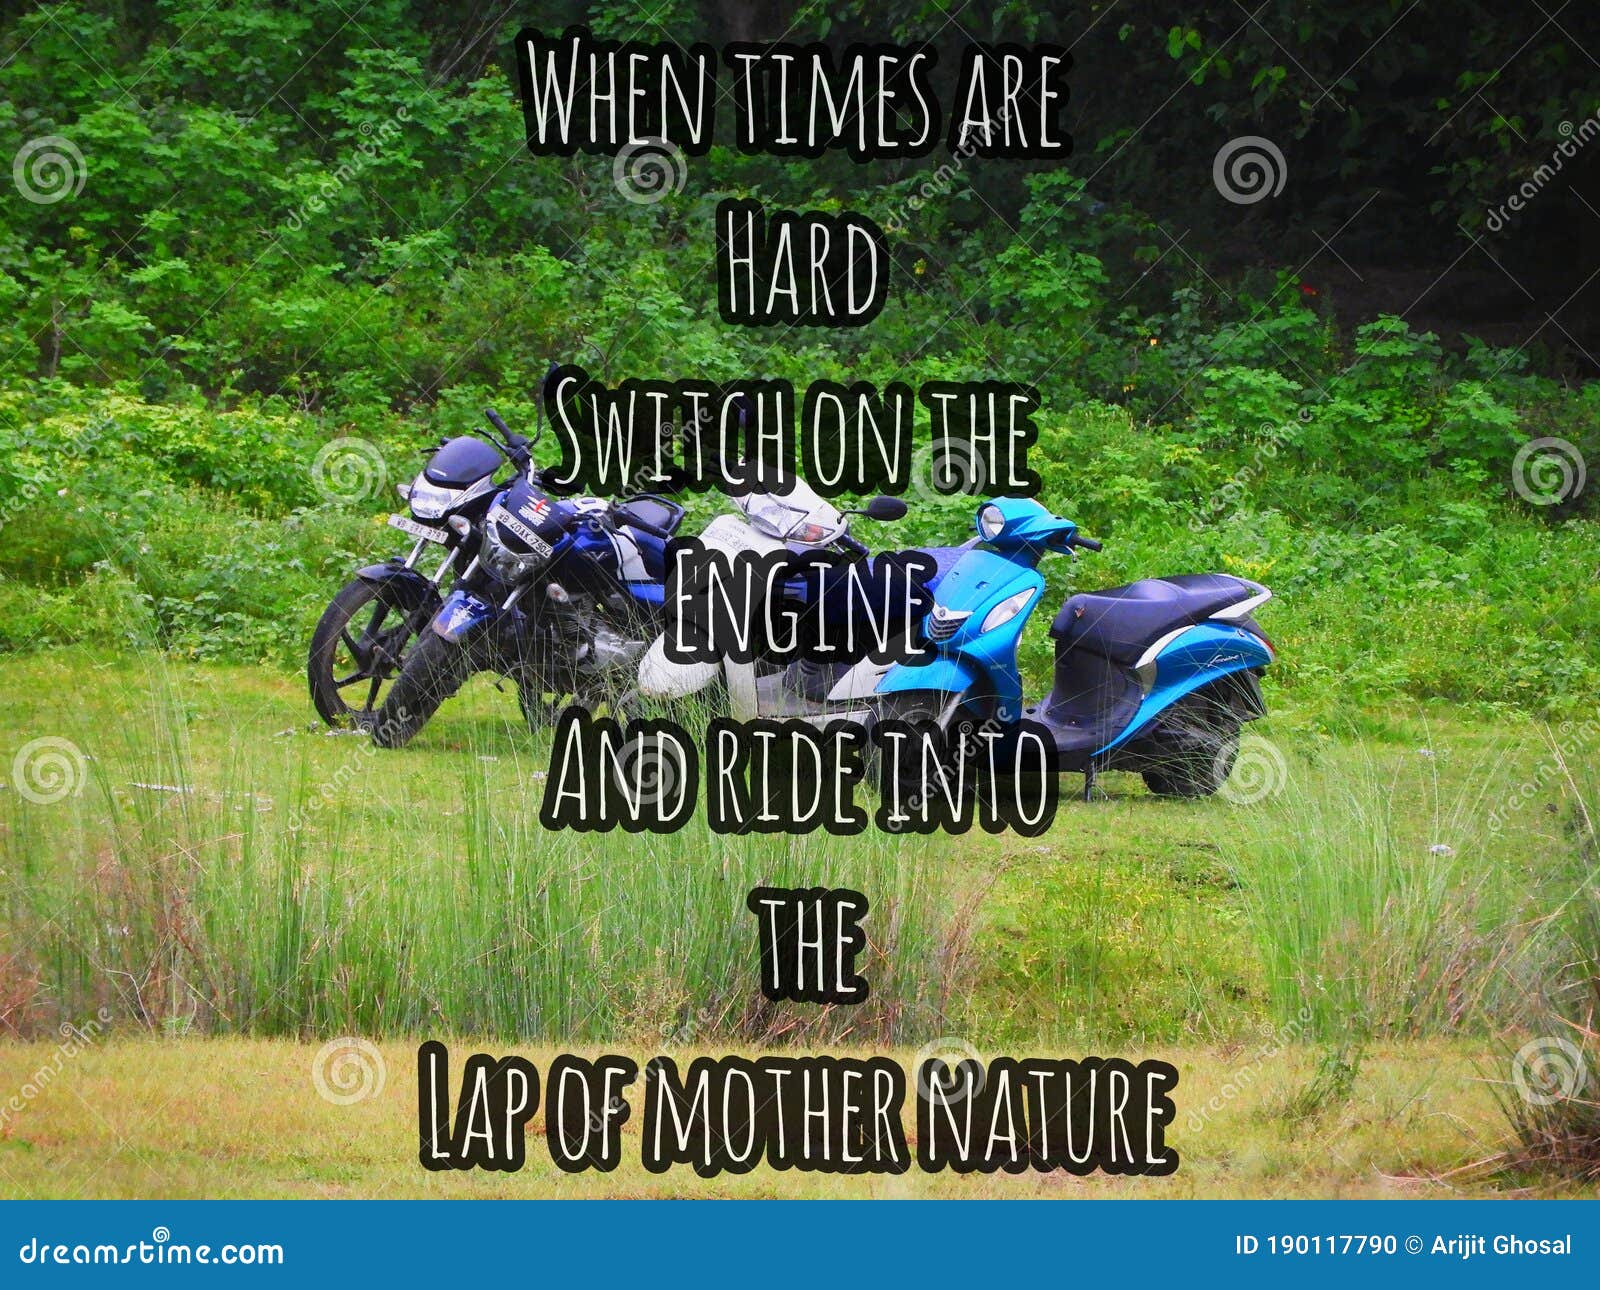 Love of Motorcycle Bike Riding with Friends into Nature Stock Photo - Image switch, motorcycle: 190117790